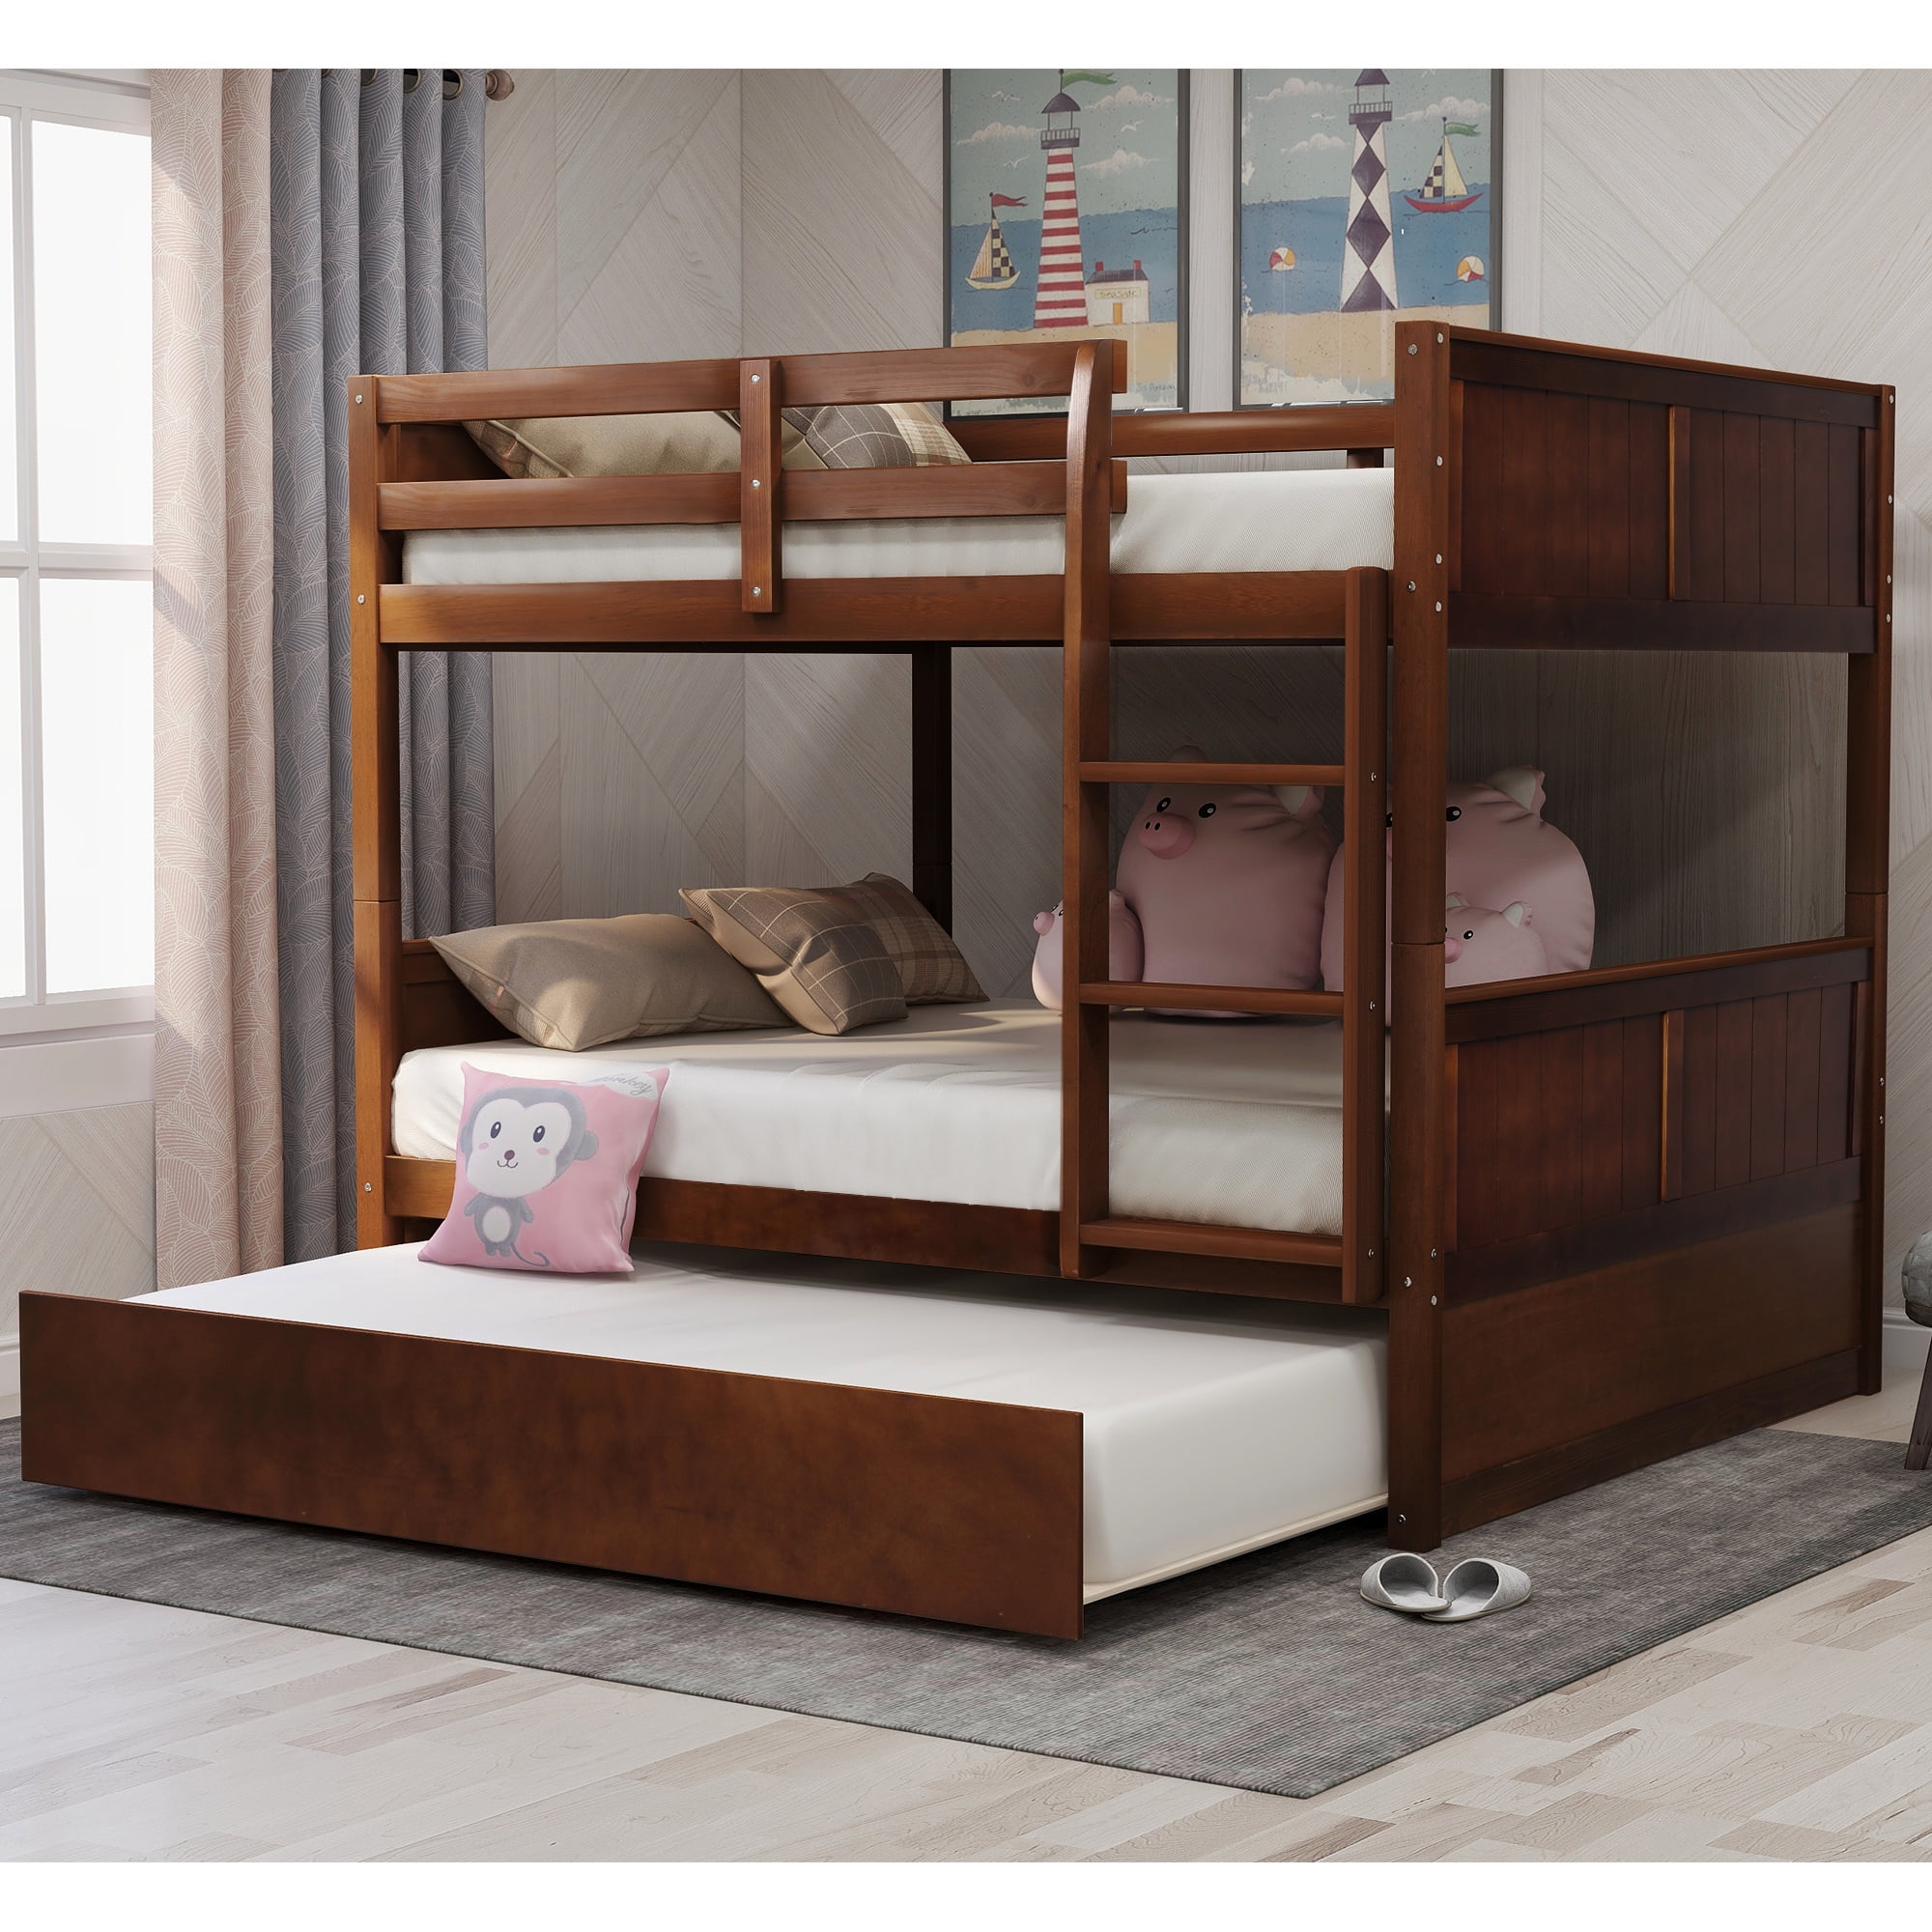 Full Bunk Bed With Trundle Convertible, Full Size Bunk Beds